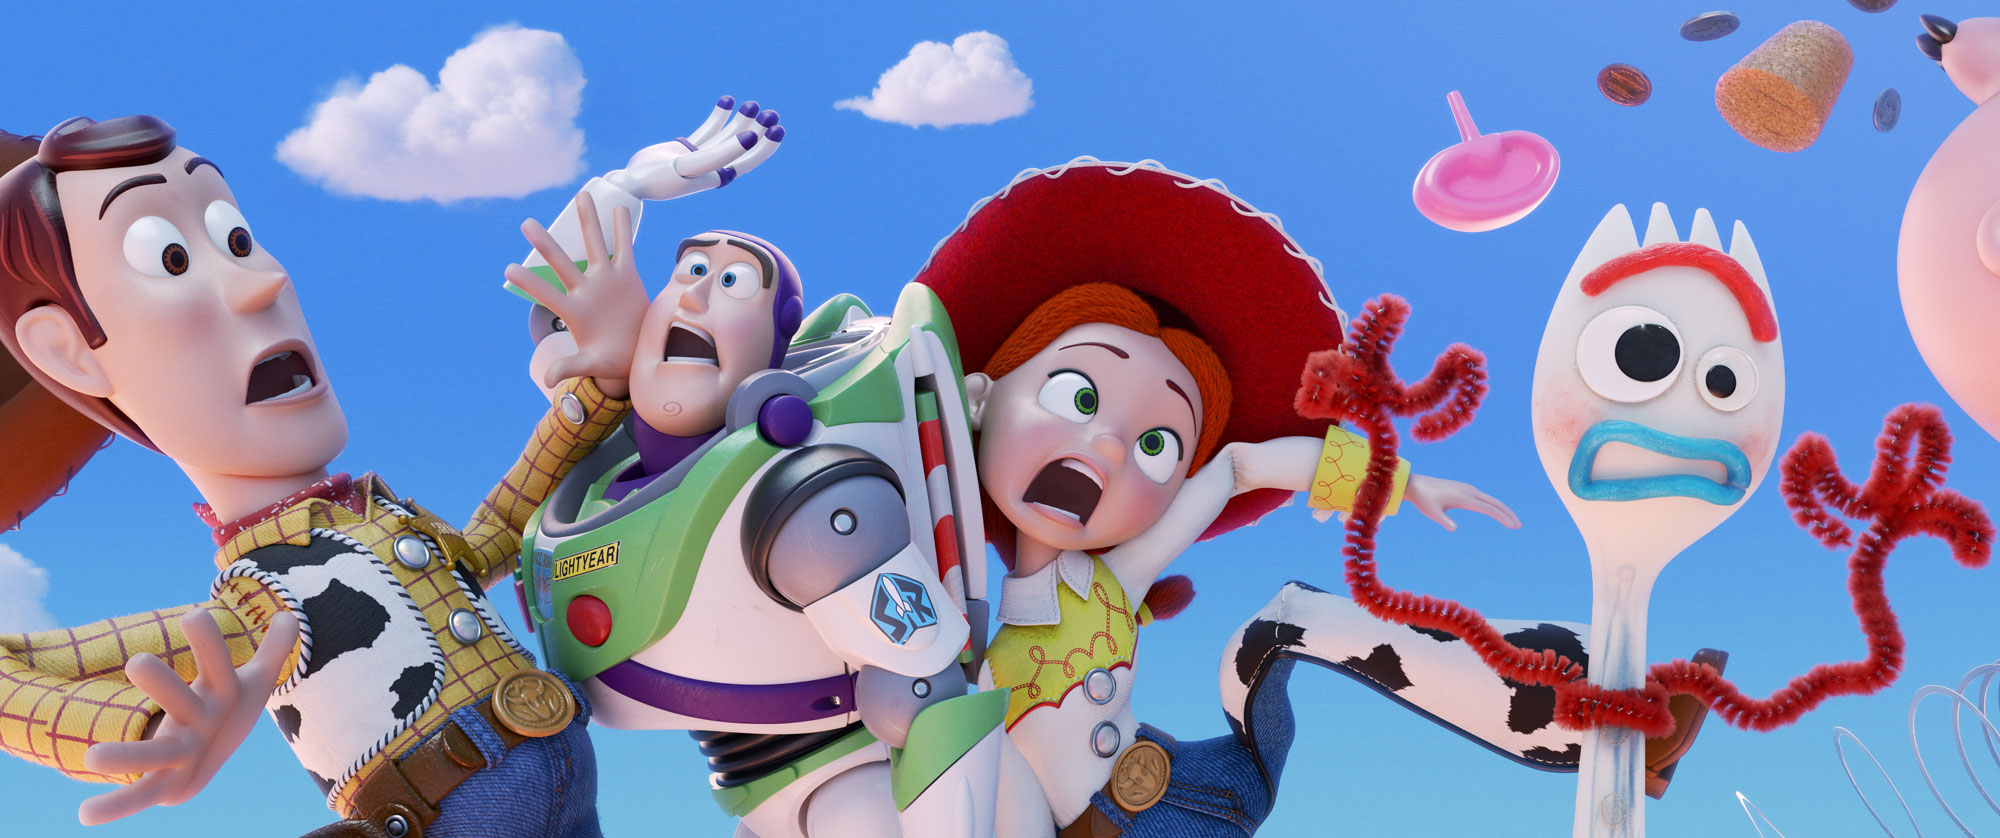 Tony Hale (Forky) Introduces Sneak Peek at “Toy Story 4” Coming to Disney Parks As Soon As Next Week